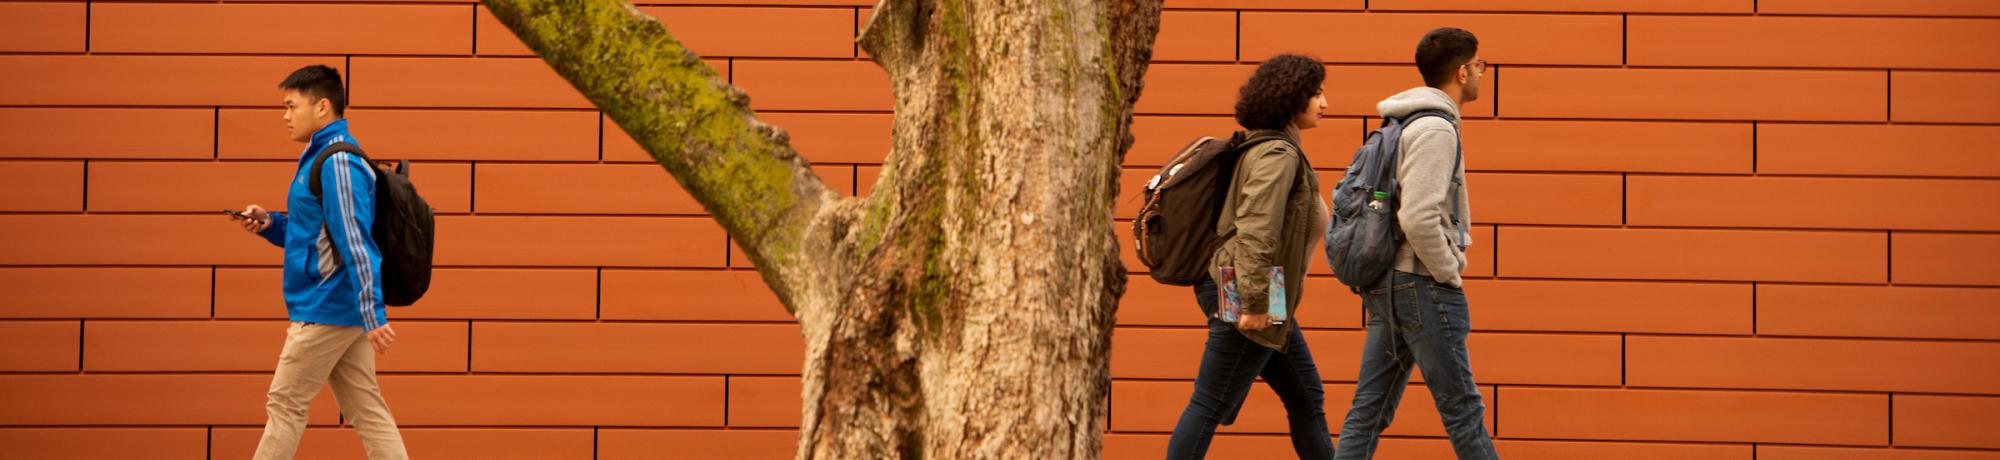 Students walking near tree and building